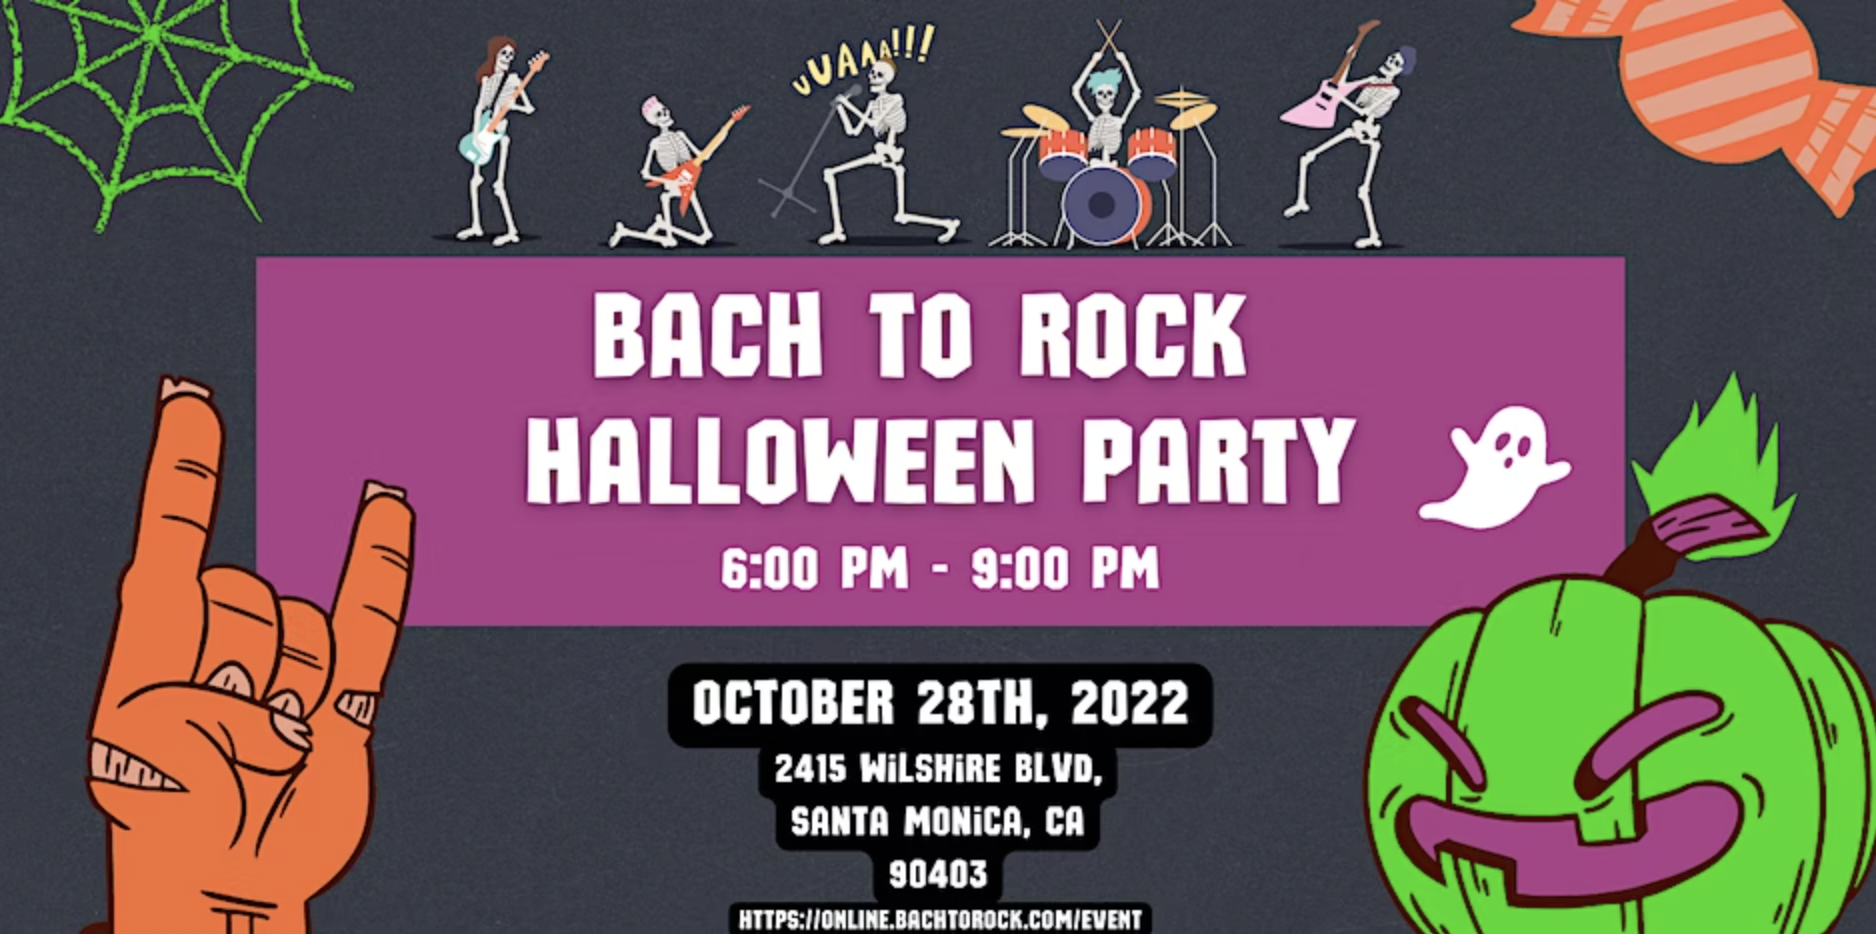 Bach to Rock Halloween Party